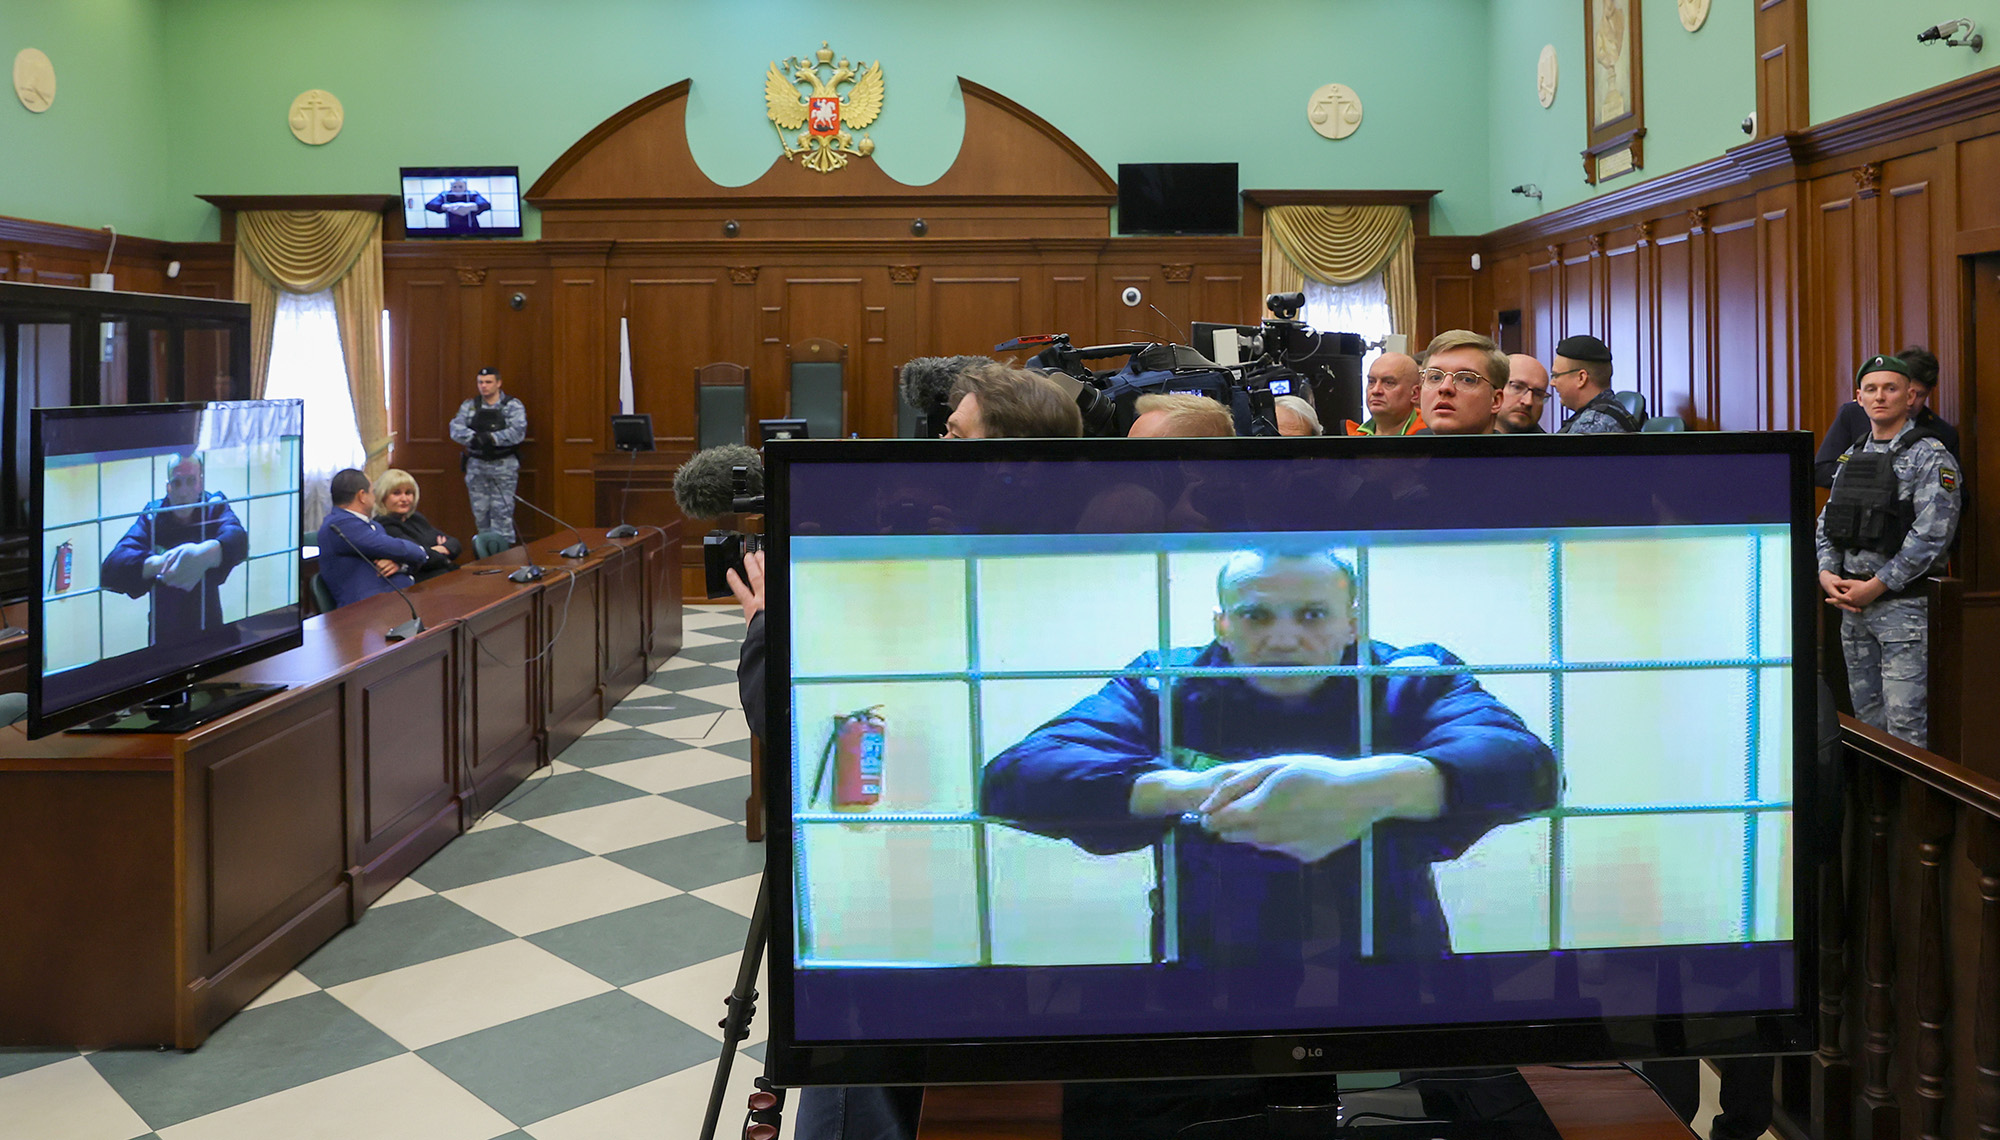 Russian opposition leader Alexei Navalny is seen on screens via a video link from the IK-2 corrective penal colony in Pokrov during a court hearing to consider an appeal against his prison sentence in Moscow, Russia, on May 24, 2022.